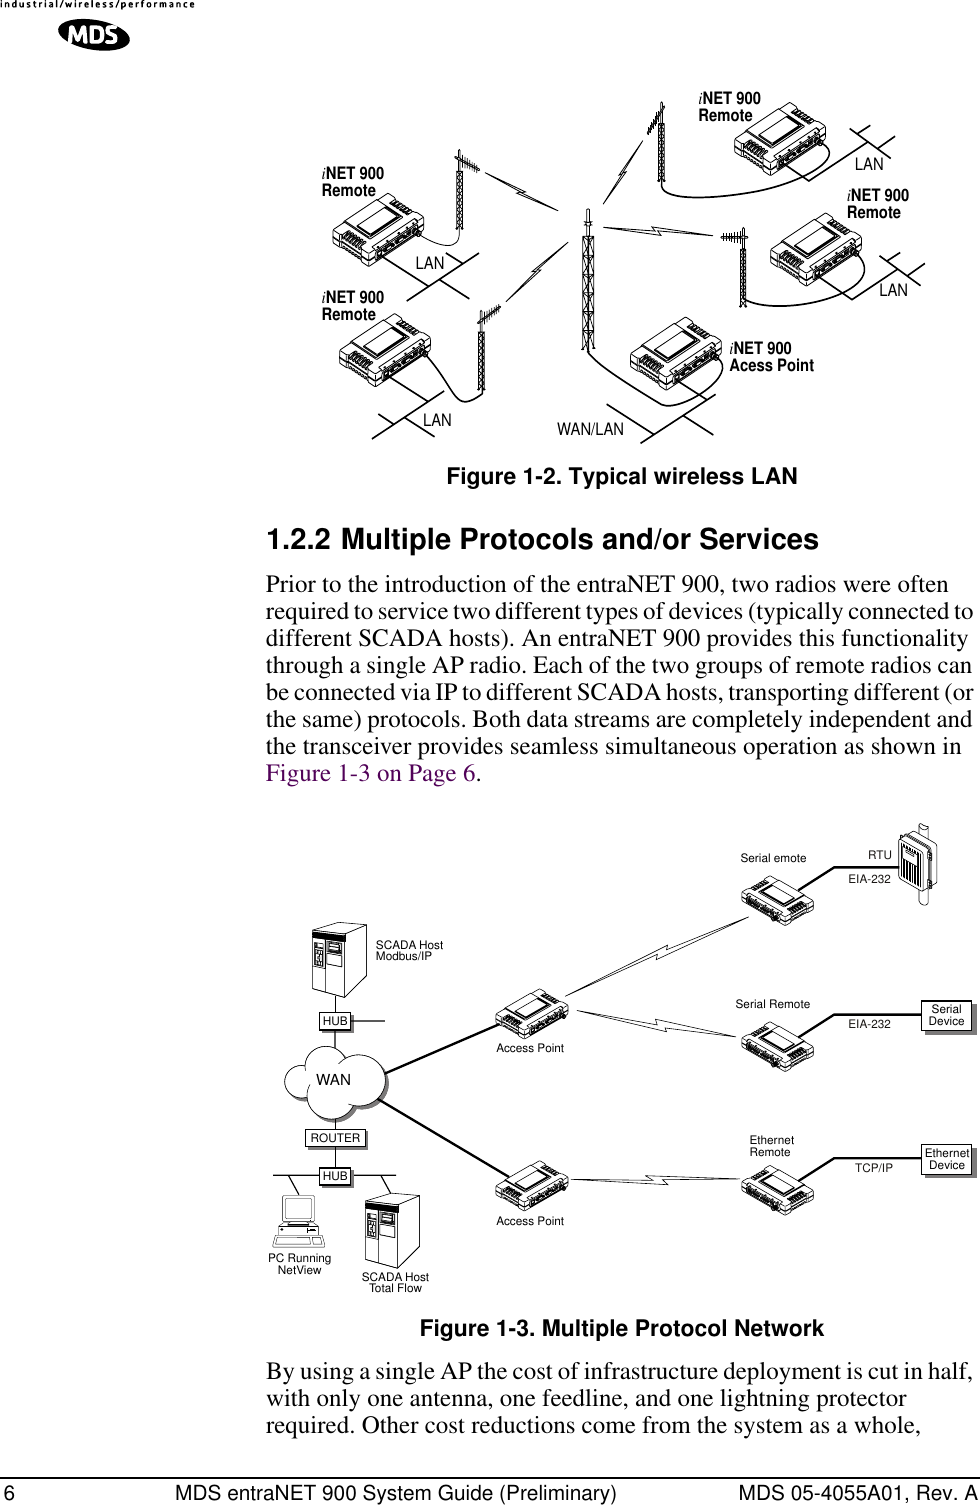  6 MDS entraNET 900 System Guide (Preliminary) MDS 05-4055A01, Rev. A Invisible place holder Figure 1-2. Typical wireless LAN 1.2.2 Multiple Protocols and/or Services Prior to the introduction of the entraNET 900, two radios were often required to service two different types of devices (typically connected to different SCADA hosts). An entraNET 900 provides this functionality through a single AP radio. Each of the two groups of remote radios can be connected via IP to different SCADA hosts, transporting different (or the same) protocols. Both data streams are completely independent and the transceiver provides seamless simultaneous operation as shown in Figure 1-3 on Page 6.  Invisible place holder Figure 1-3. Multiple Protocol Network By using a single AP the cost of infrastructure deployment is cut in half, with only one antenna, one feedline, and one lightning protector required. Other cost reductions come from the system as a whole, iNET 900RemoteiNET 900RemoteiNET 900Acess PointiNET 900RemoteiNET 900RemoteLANLANWAN/LANLANLANPC RunningNetView SCADA HostTotal FlowAccess PointSerial emoteSerial RemoteSCADA HostModbus/IPEthernetRemoteAccess PointRTUEIA-232EIA-232TCP/IPROUTERHUB SerialDeviceHUBHUBHUBWANEthernetDevice